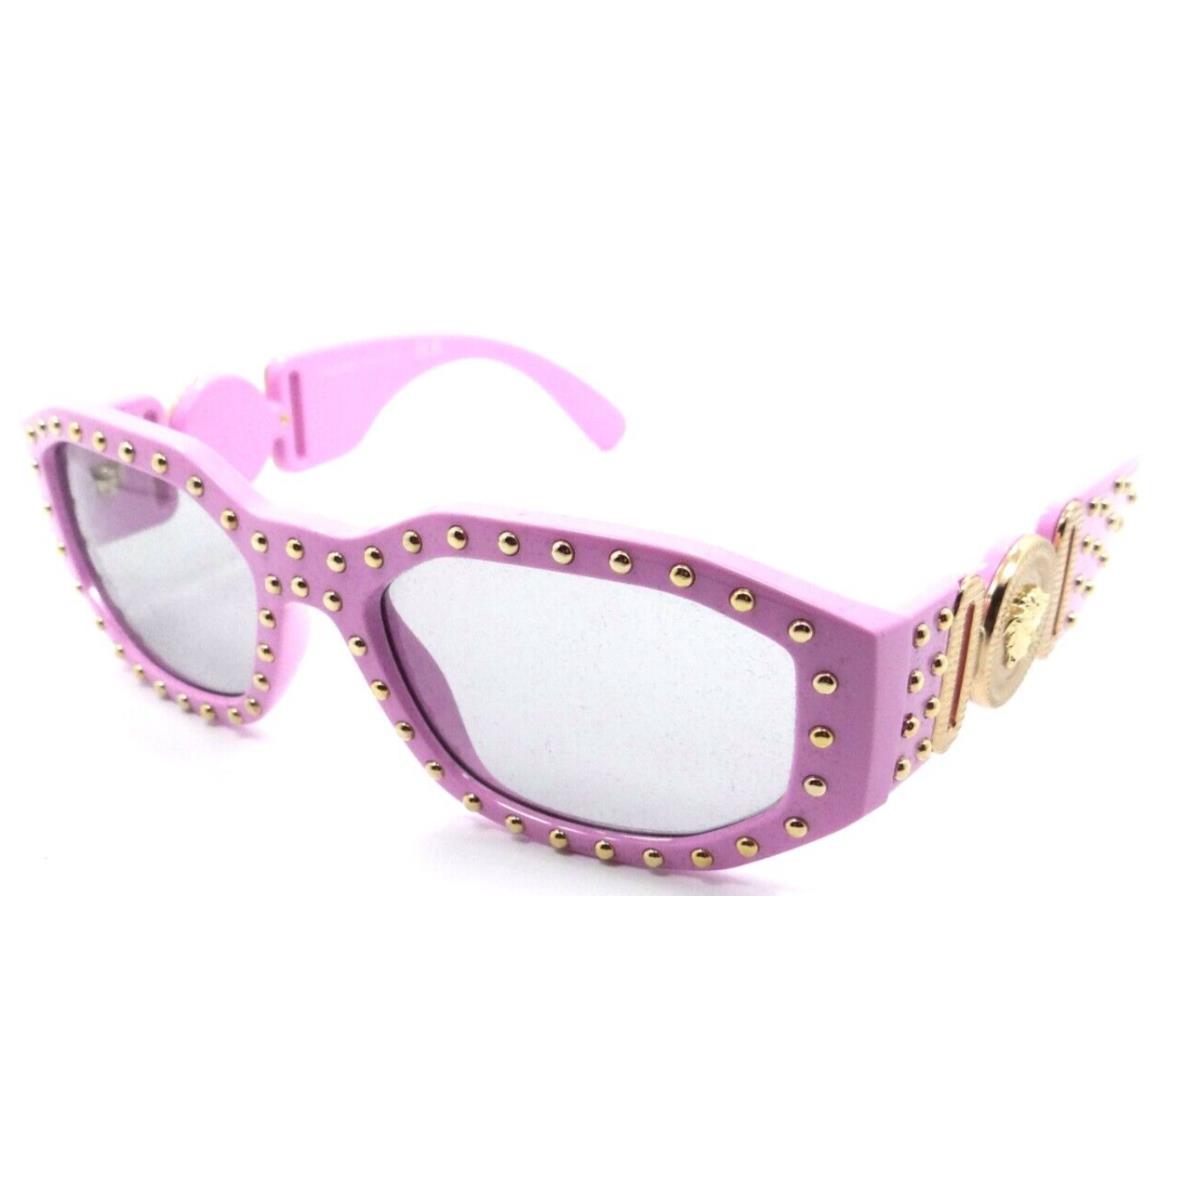 Versace Sunglasses VE 4361 5396/87 53-18-140 Pink / Light Grey Made in Italy